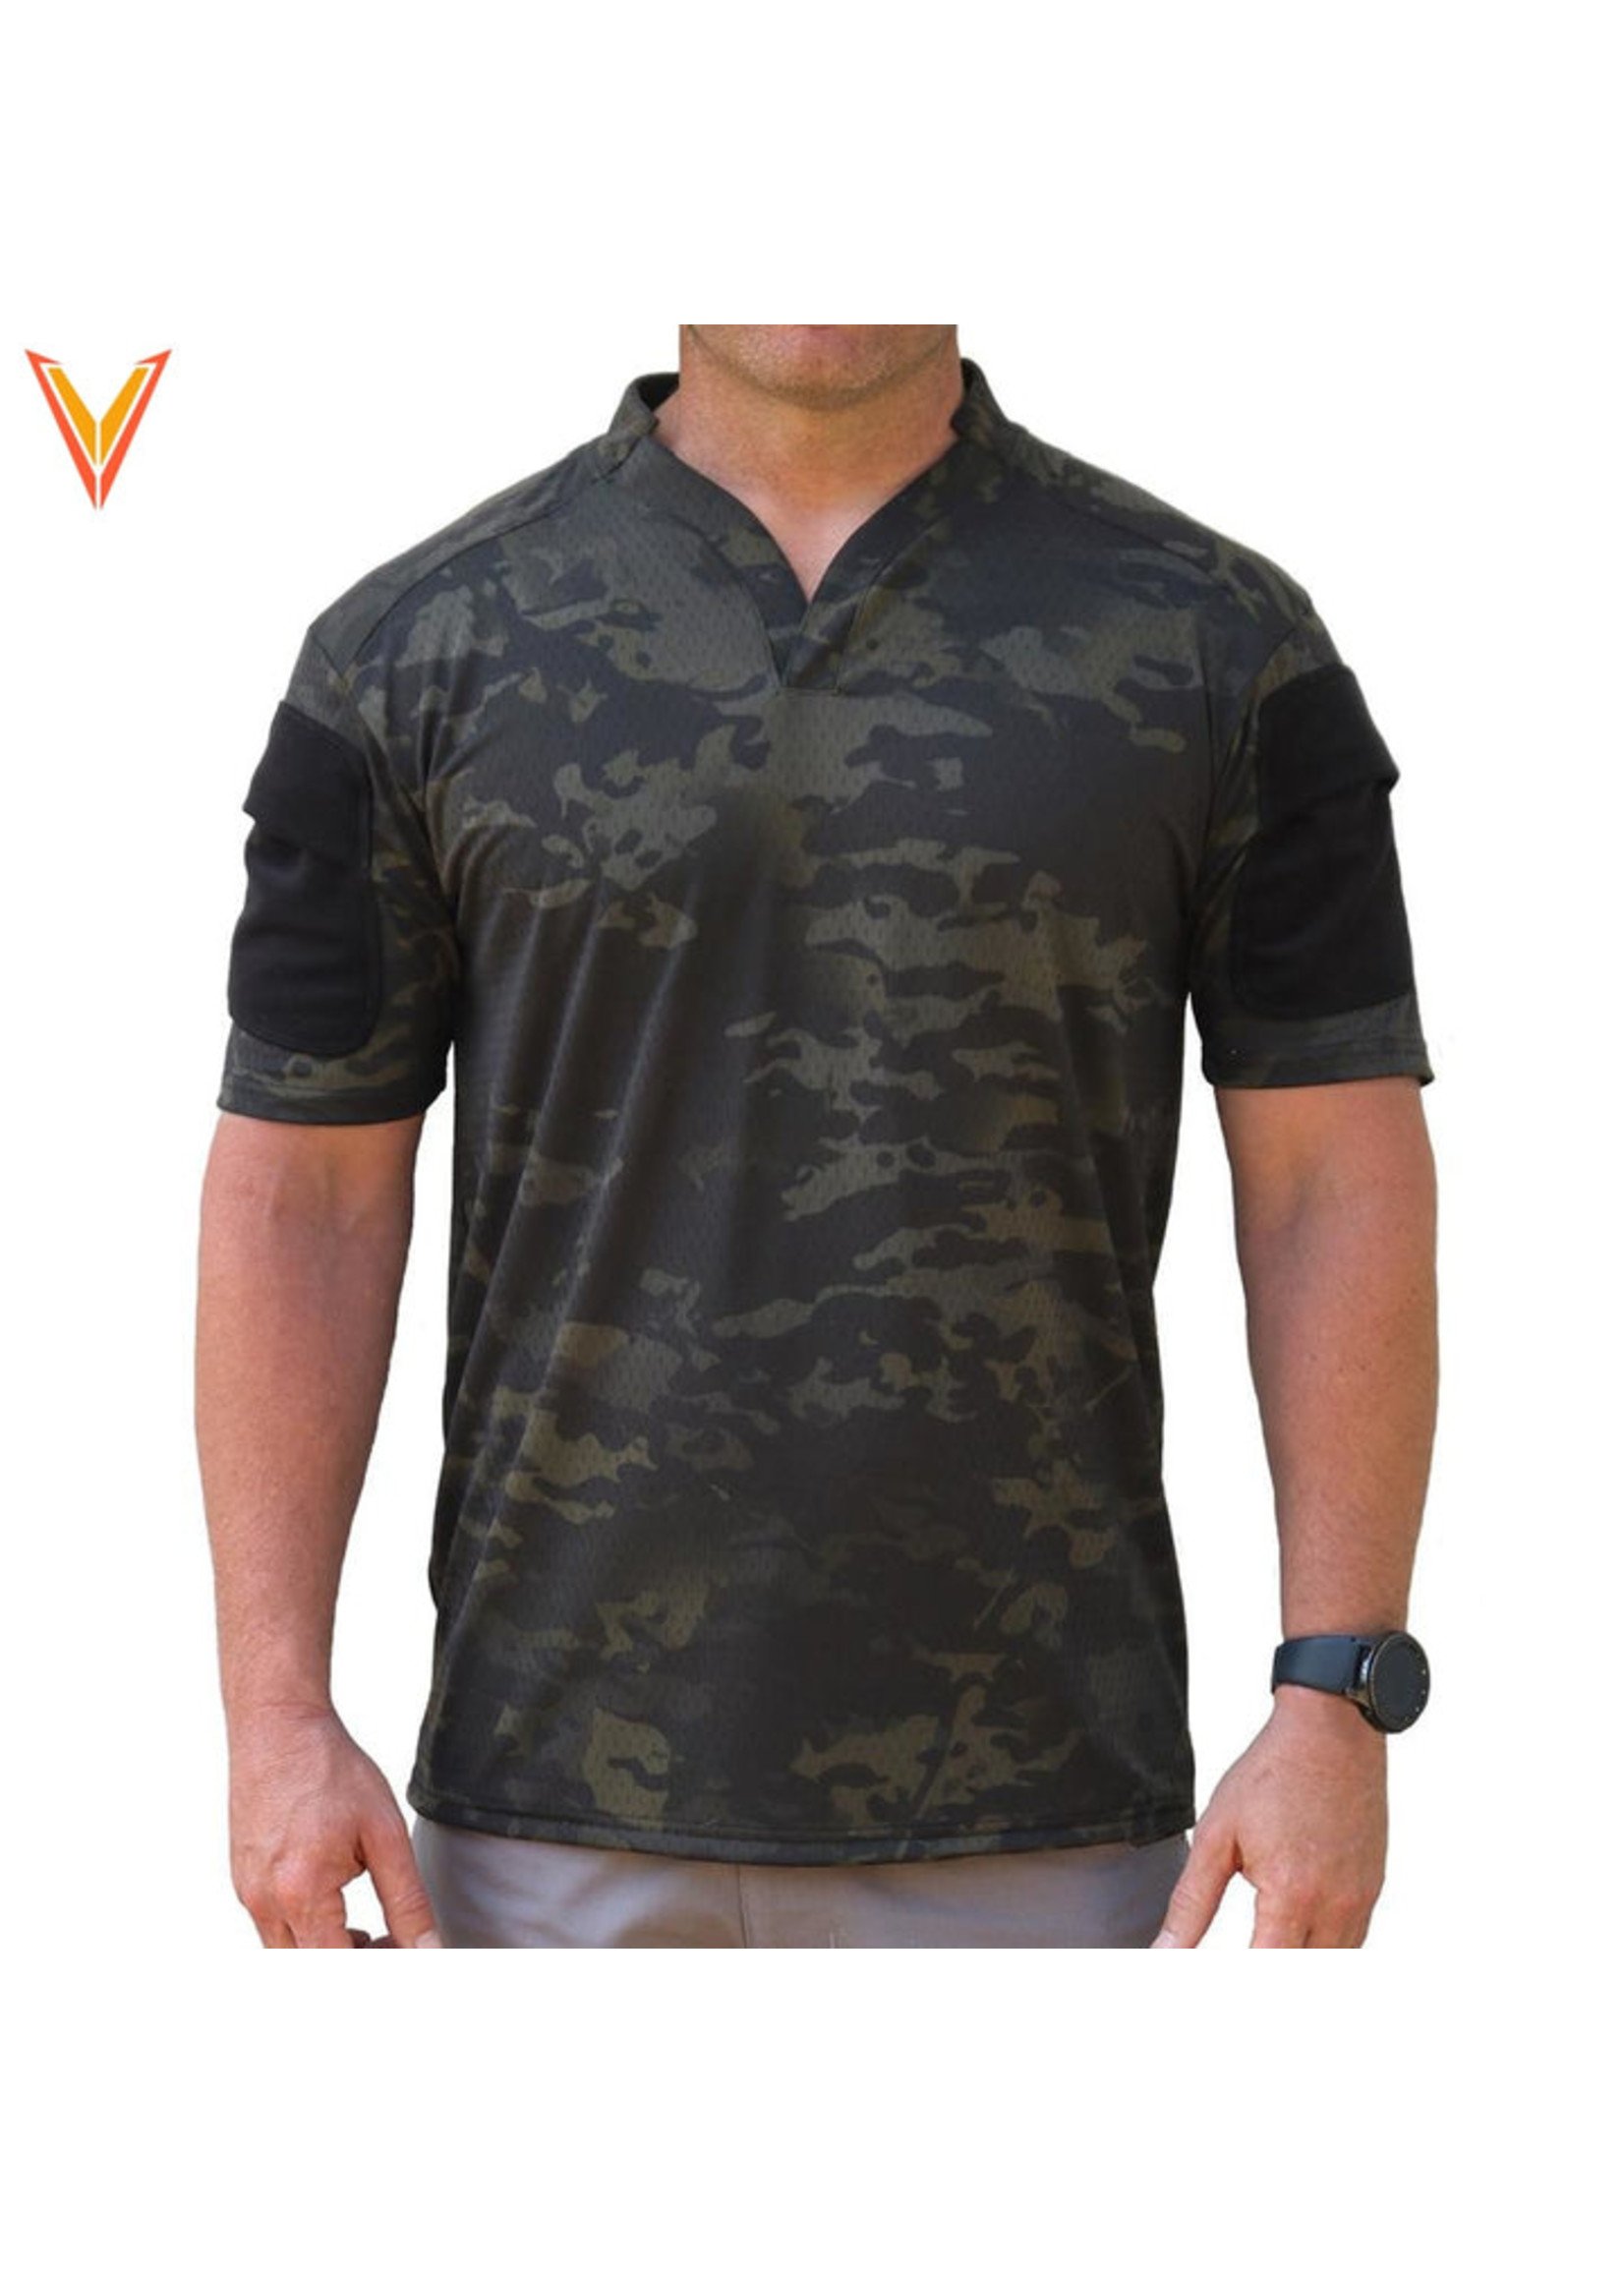 VELOCITY SYSTEMS BOSS RUGBY SHIRT